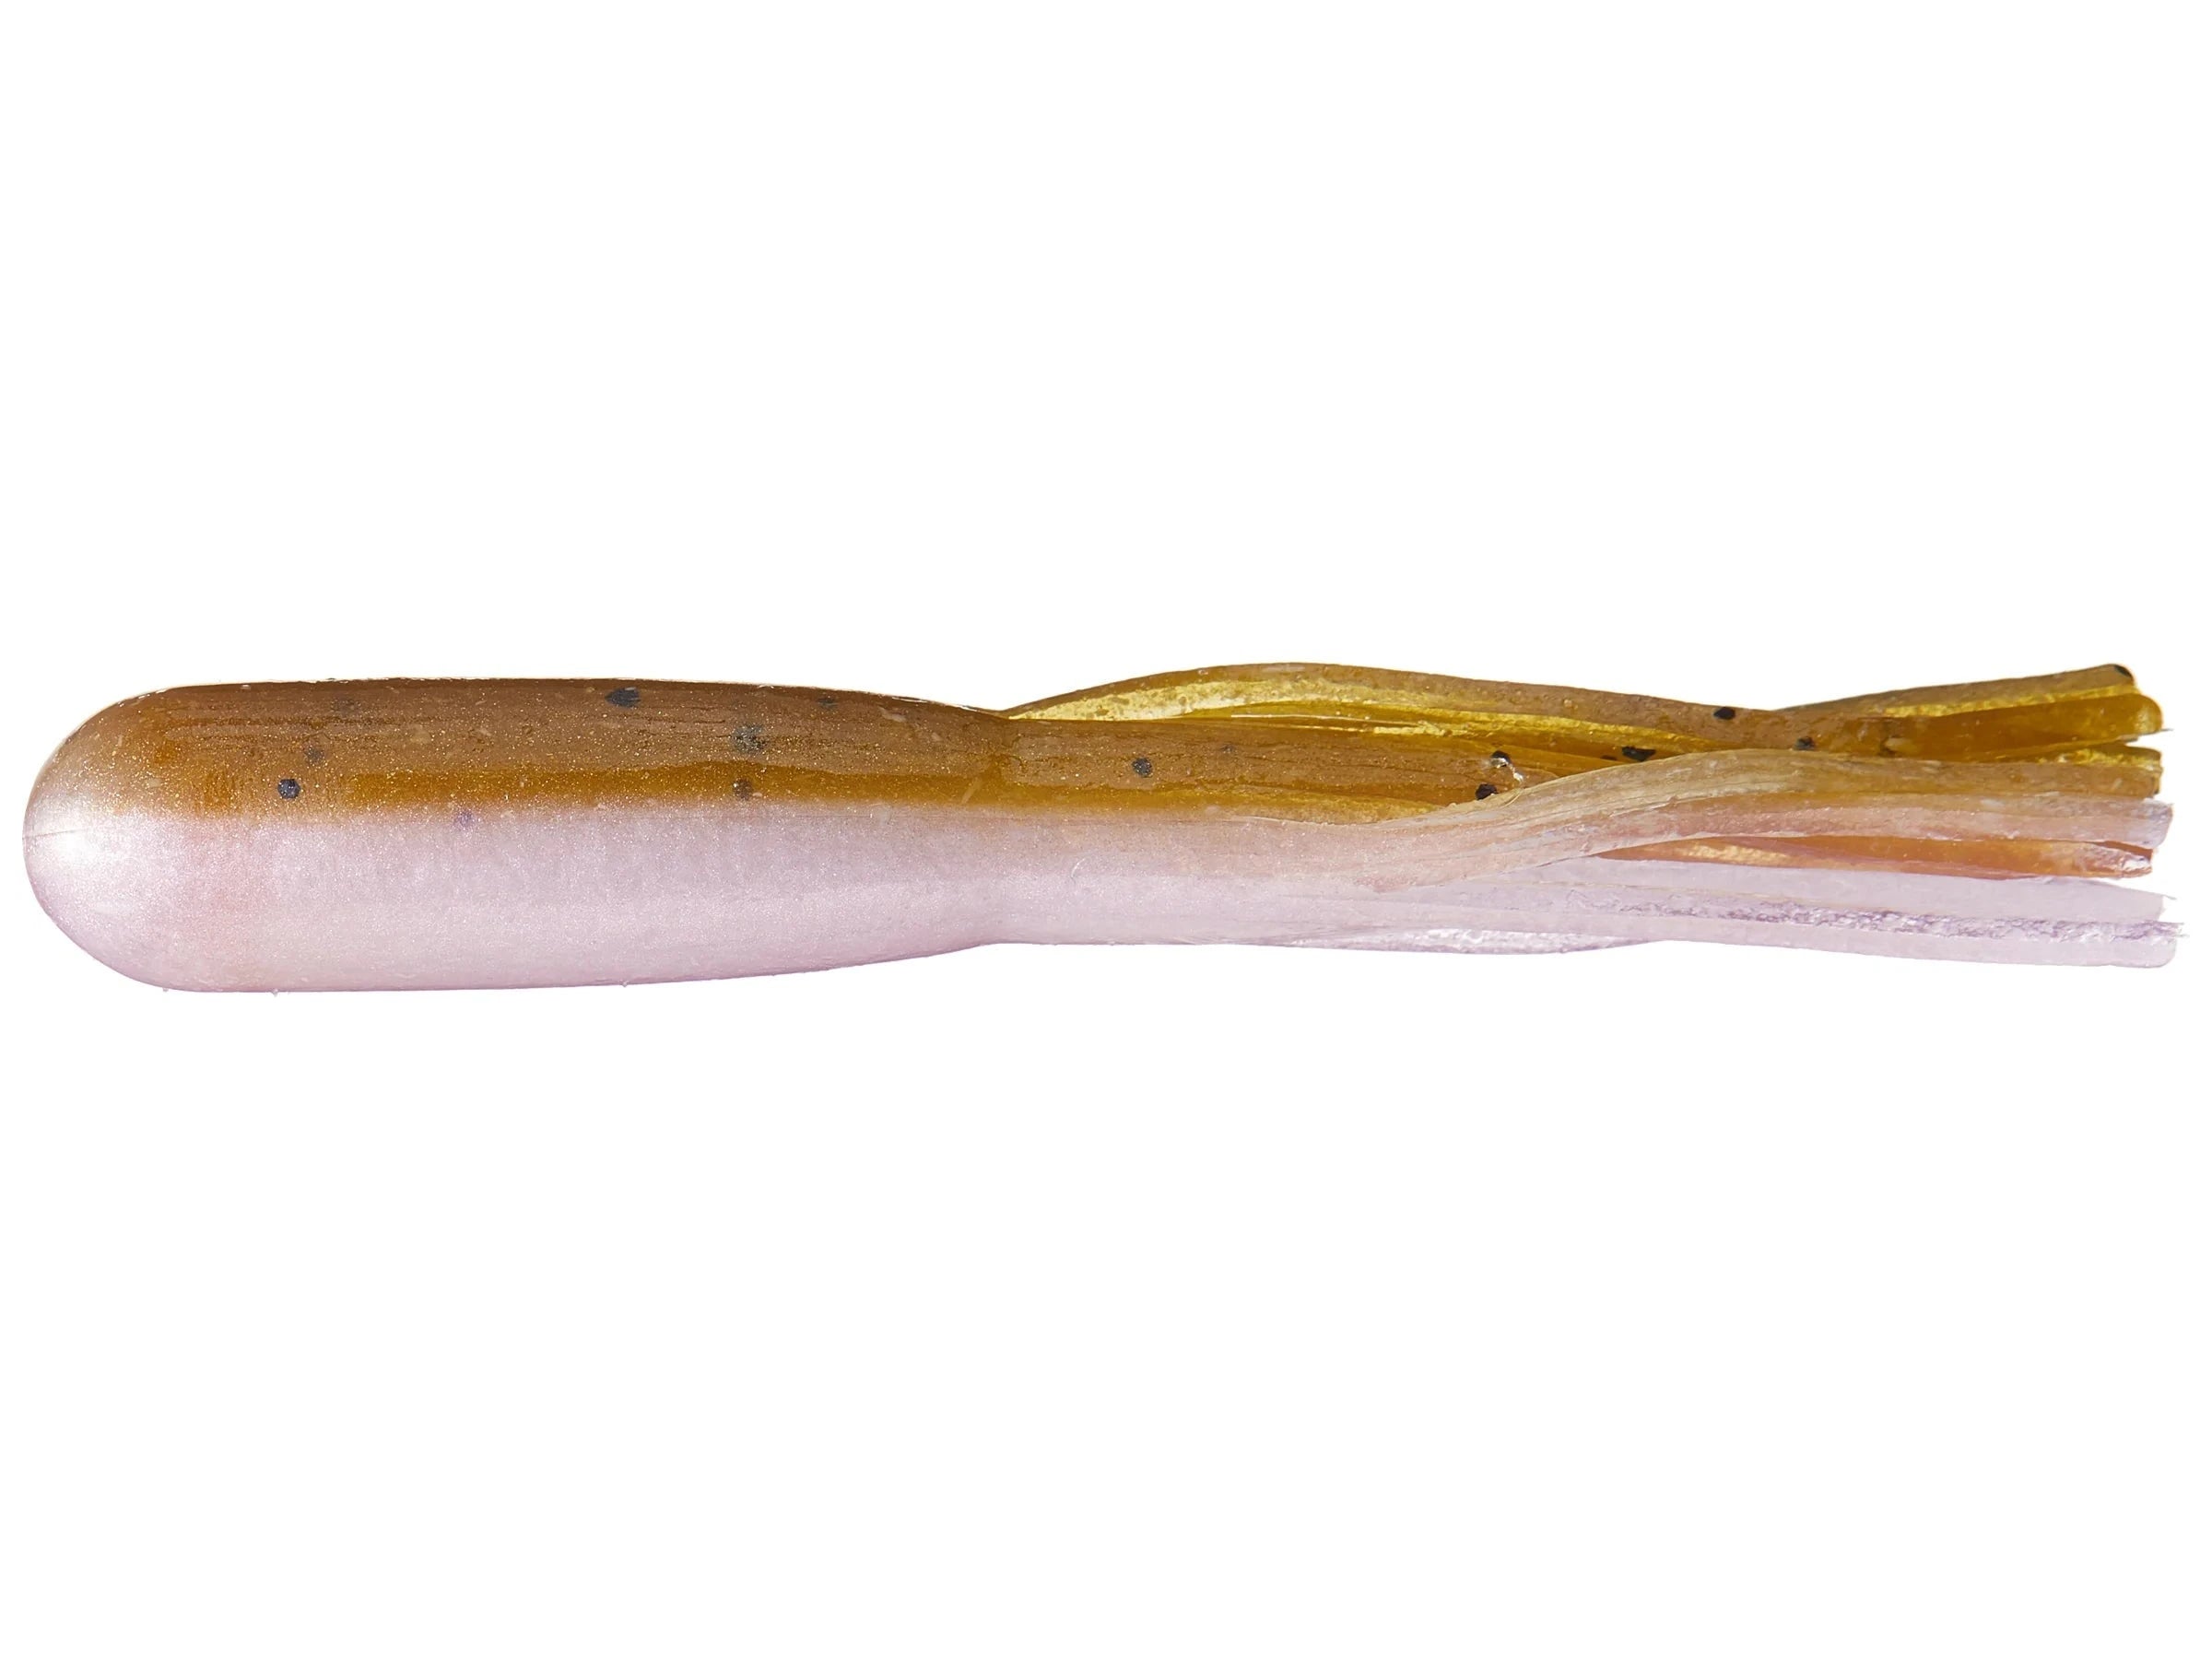 Juvenile Goby